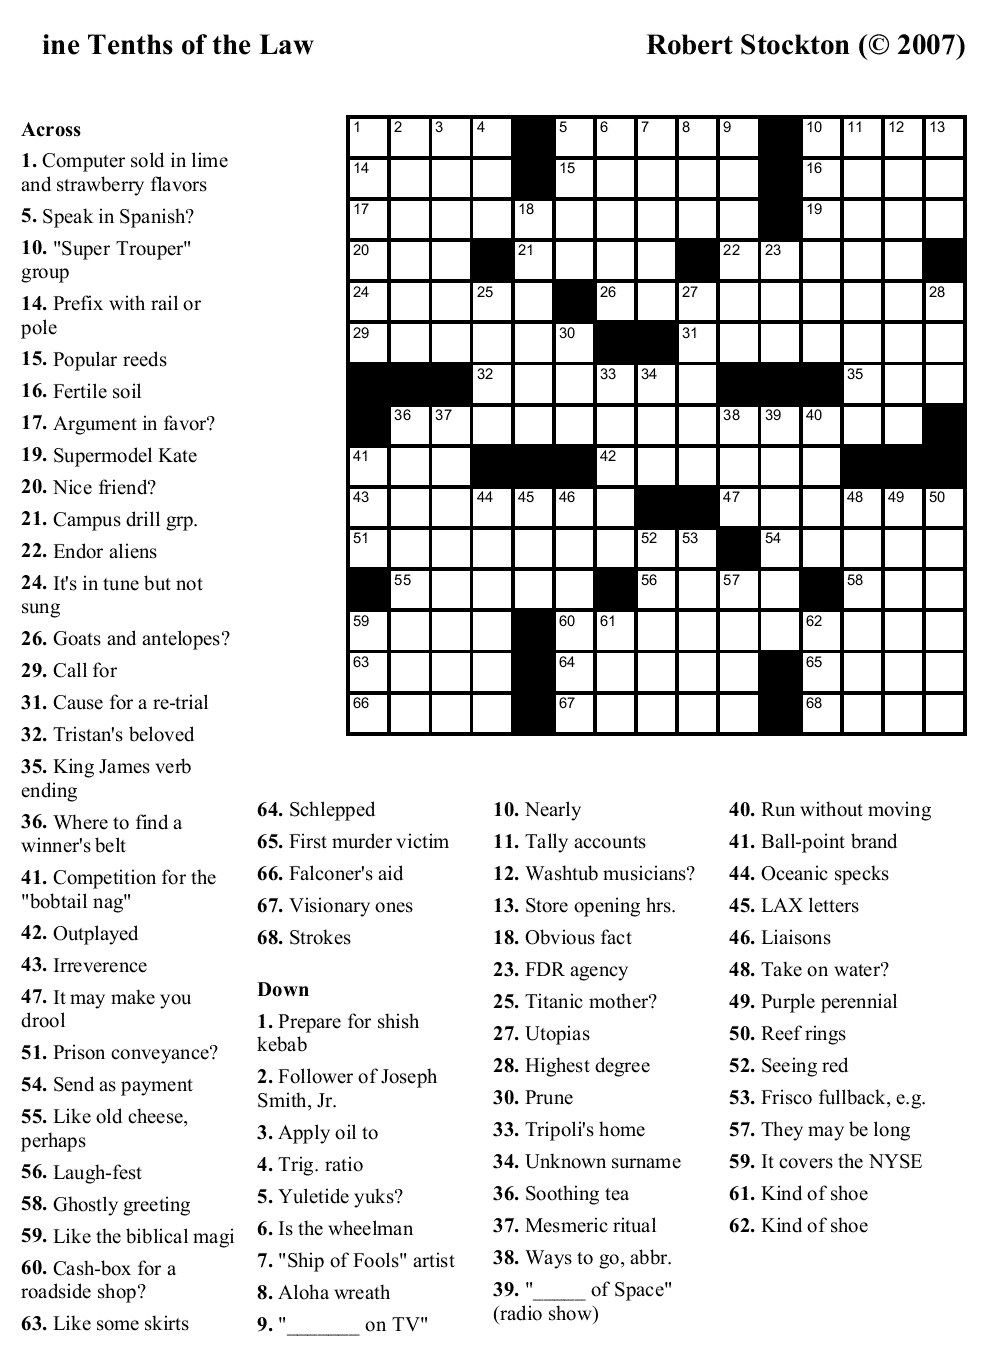 Crossword Puzzles Printable - Yahoo Image Search Results | Crossword - Printable Crossword Puzzles With Clues